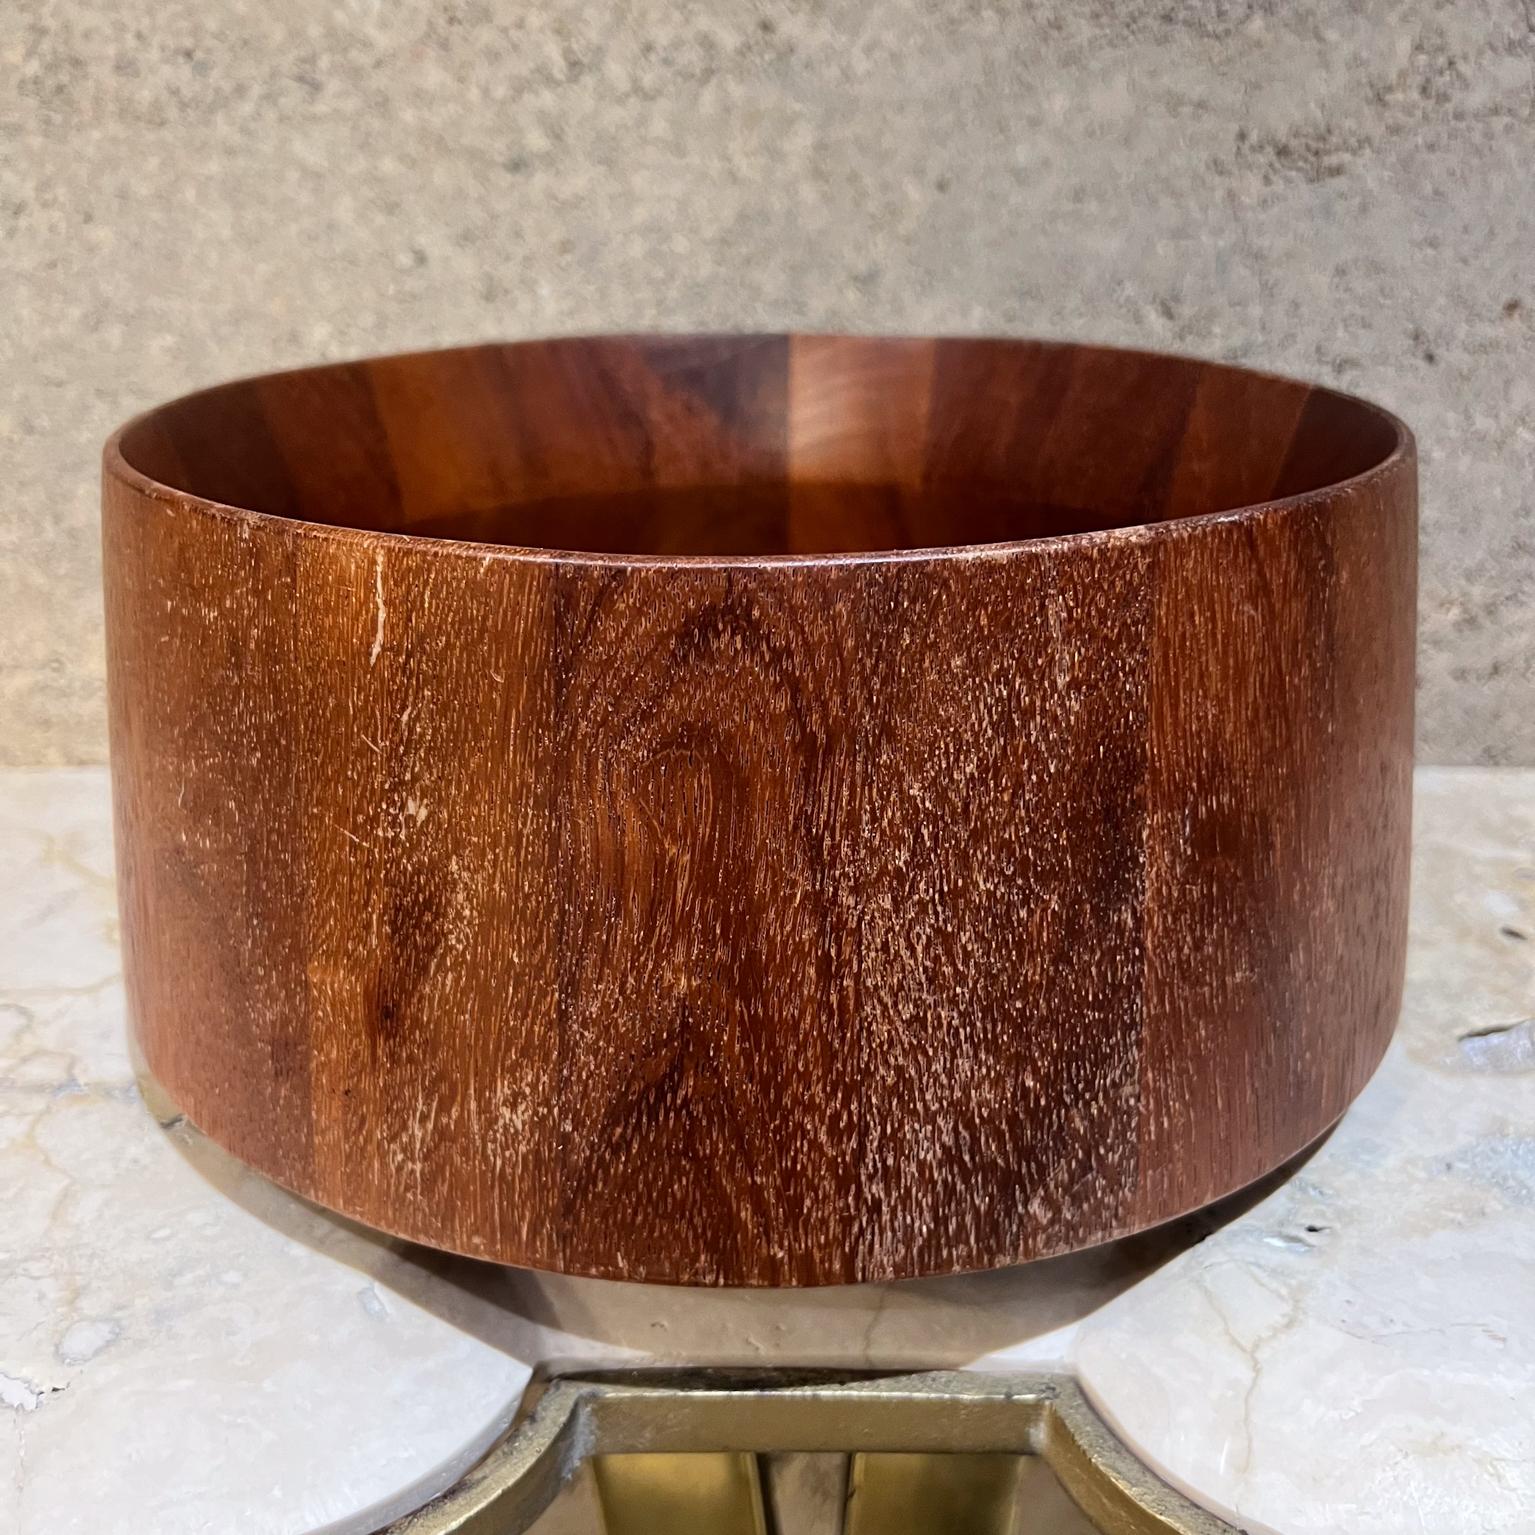 Dansk Teak Wood Bowl Malaysia
maker stamp
4.75 h x 10.5
Preowned unrestored vintage
Review all images